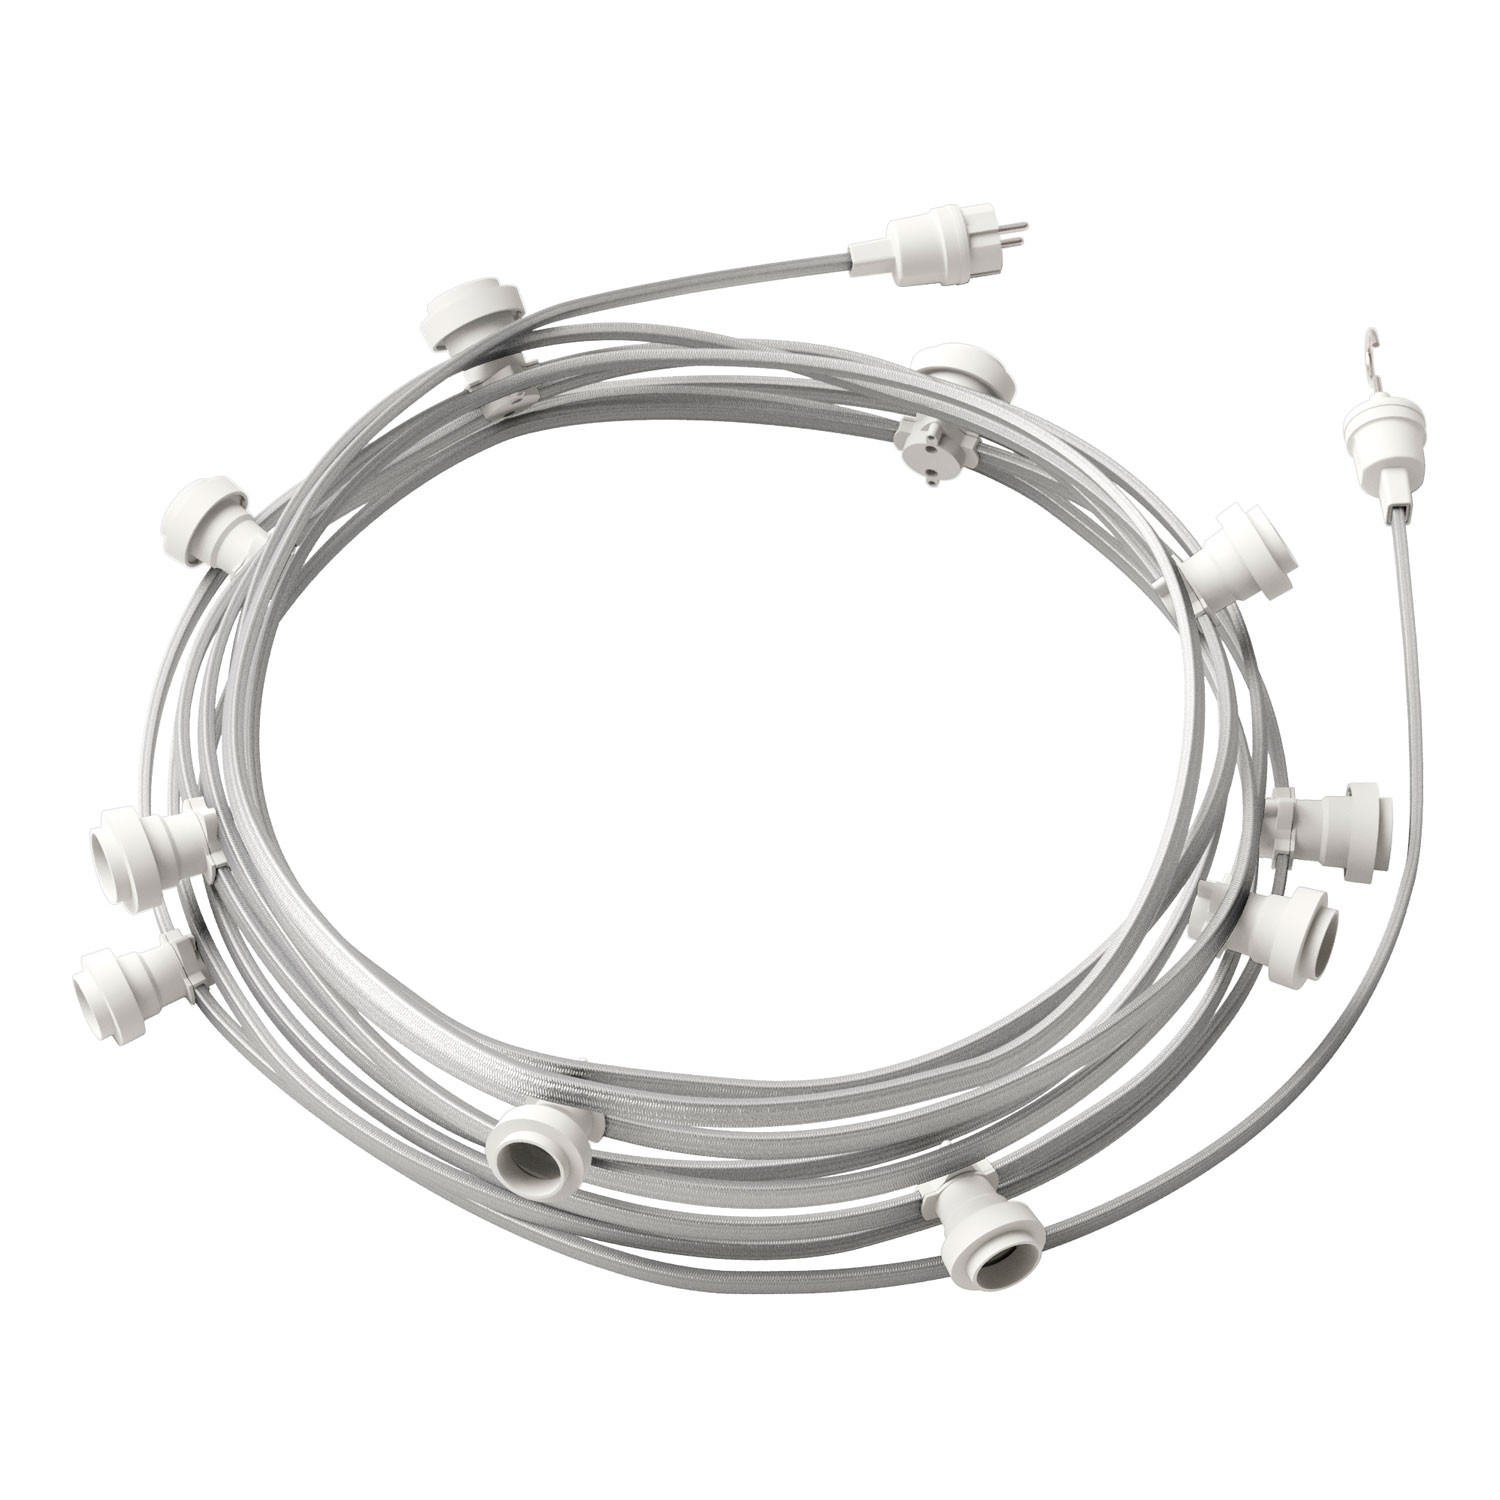 Ready-to-use 40ft String Light with 5 white Sockets, Hook and Plug